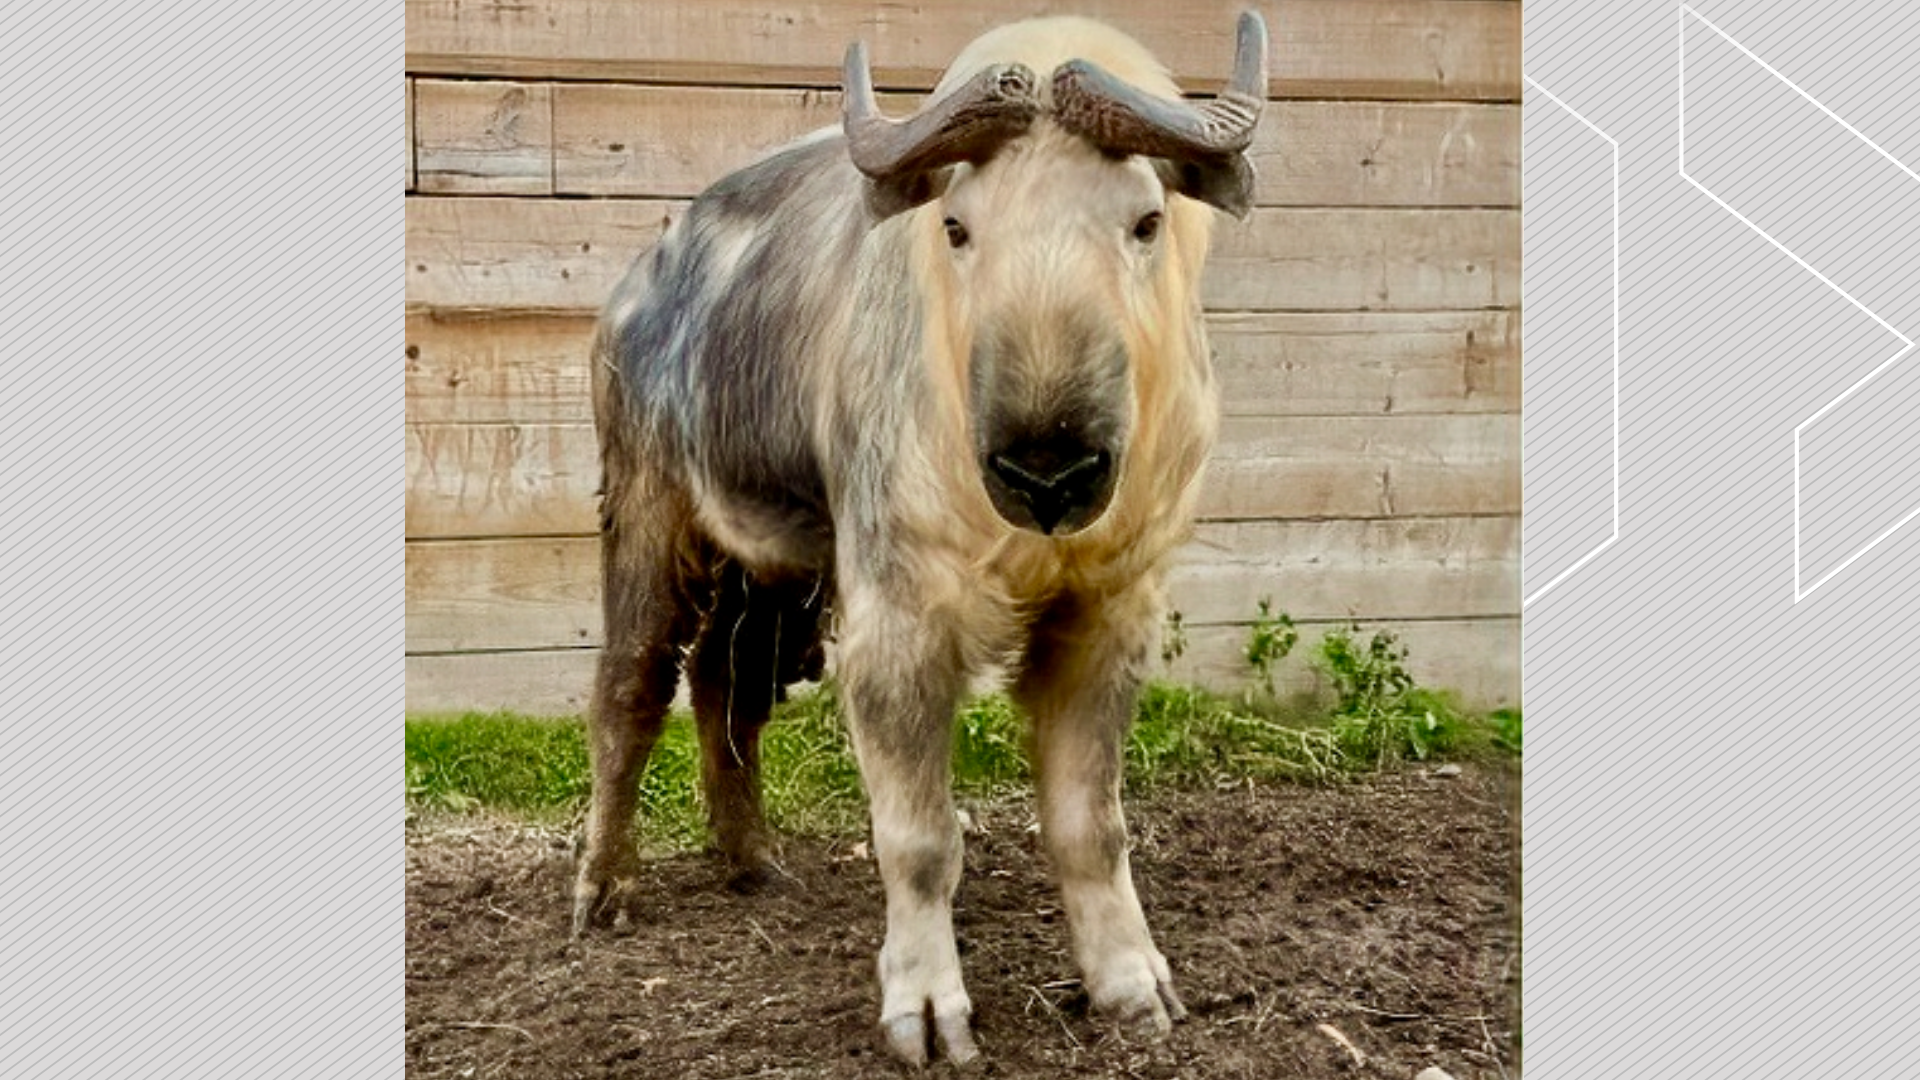 Yao-Ming the Sichuan takin dies at Riverview Park and Zoo in
Peterborough, Ont.